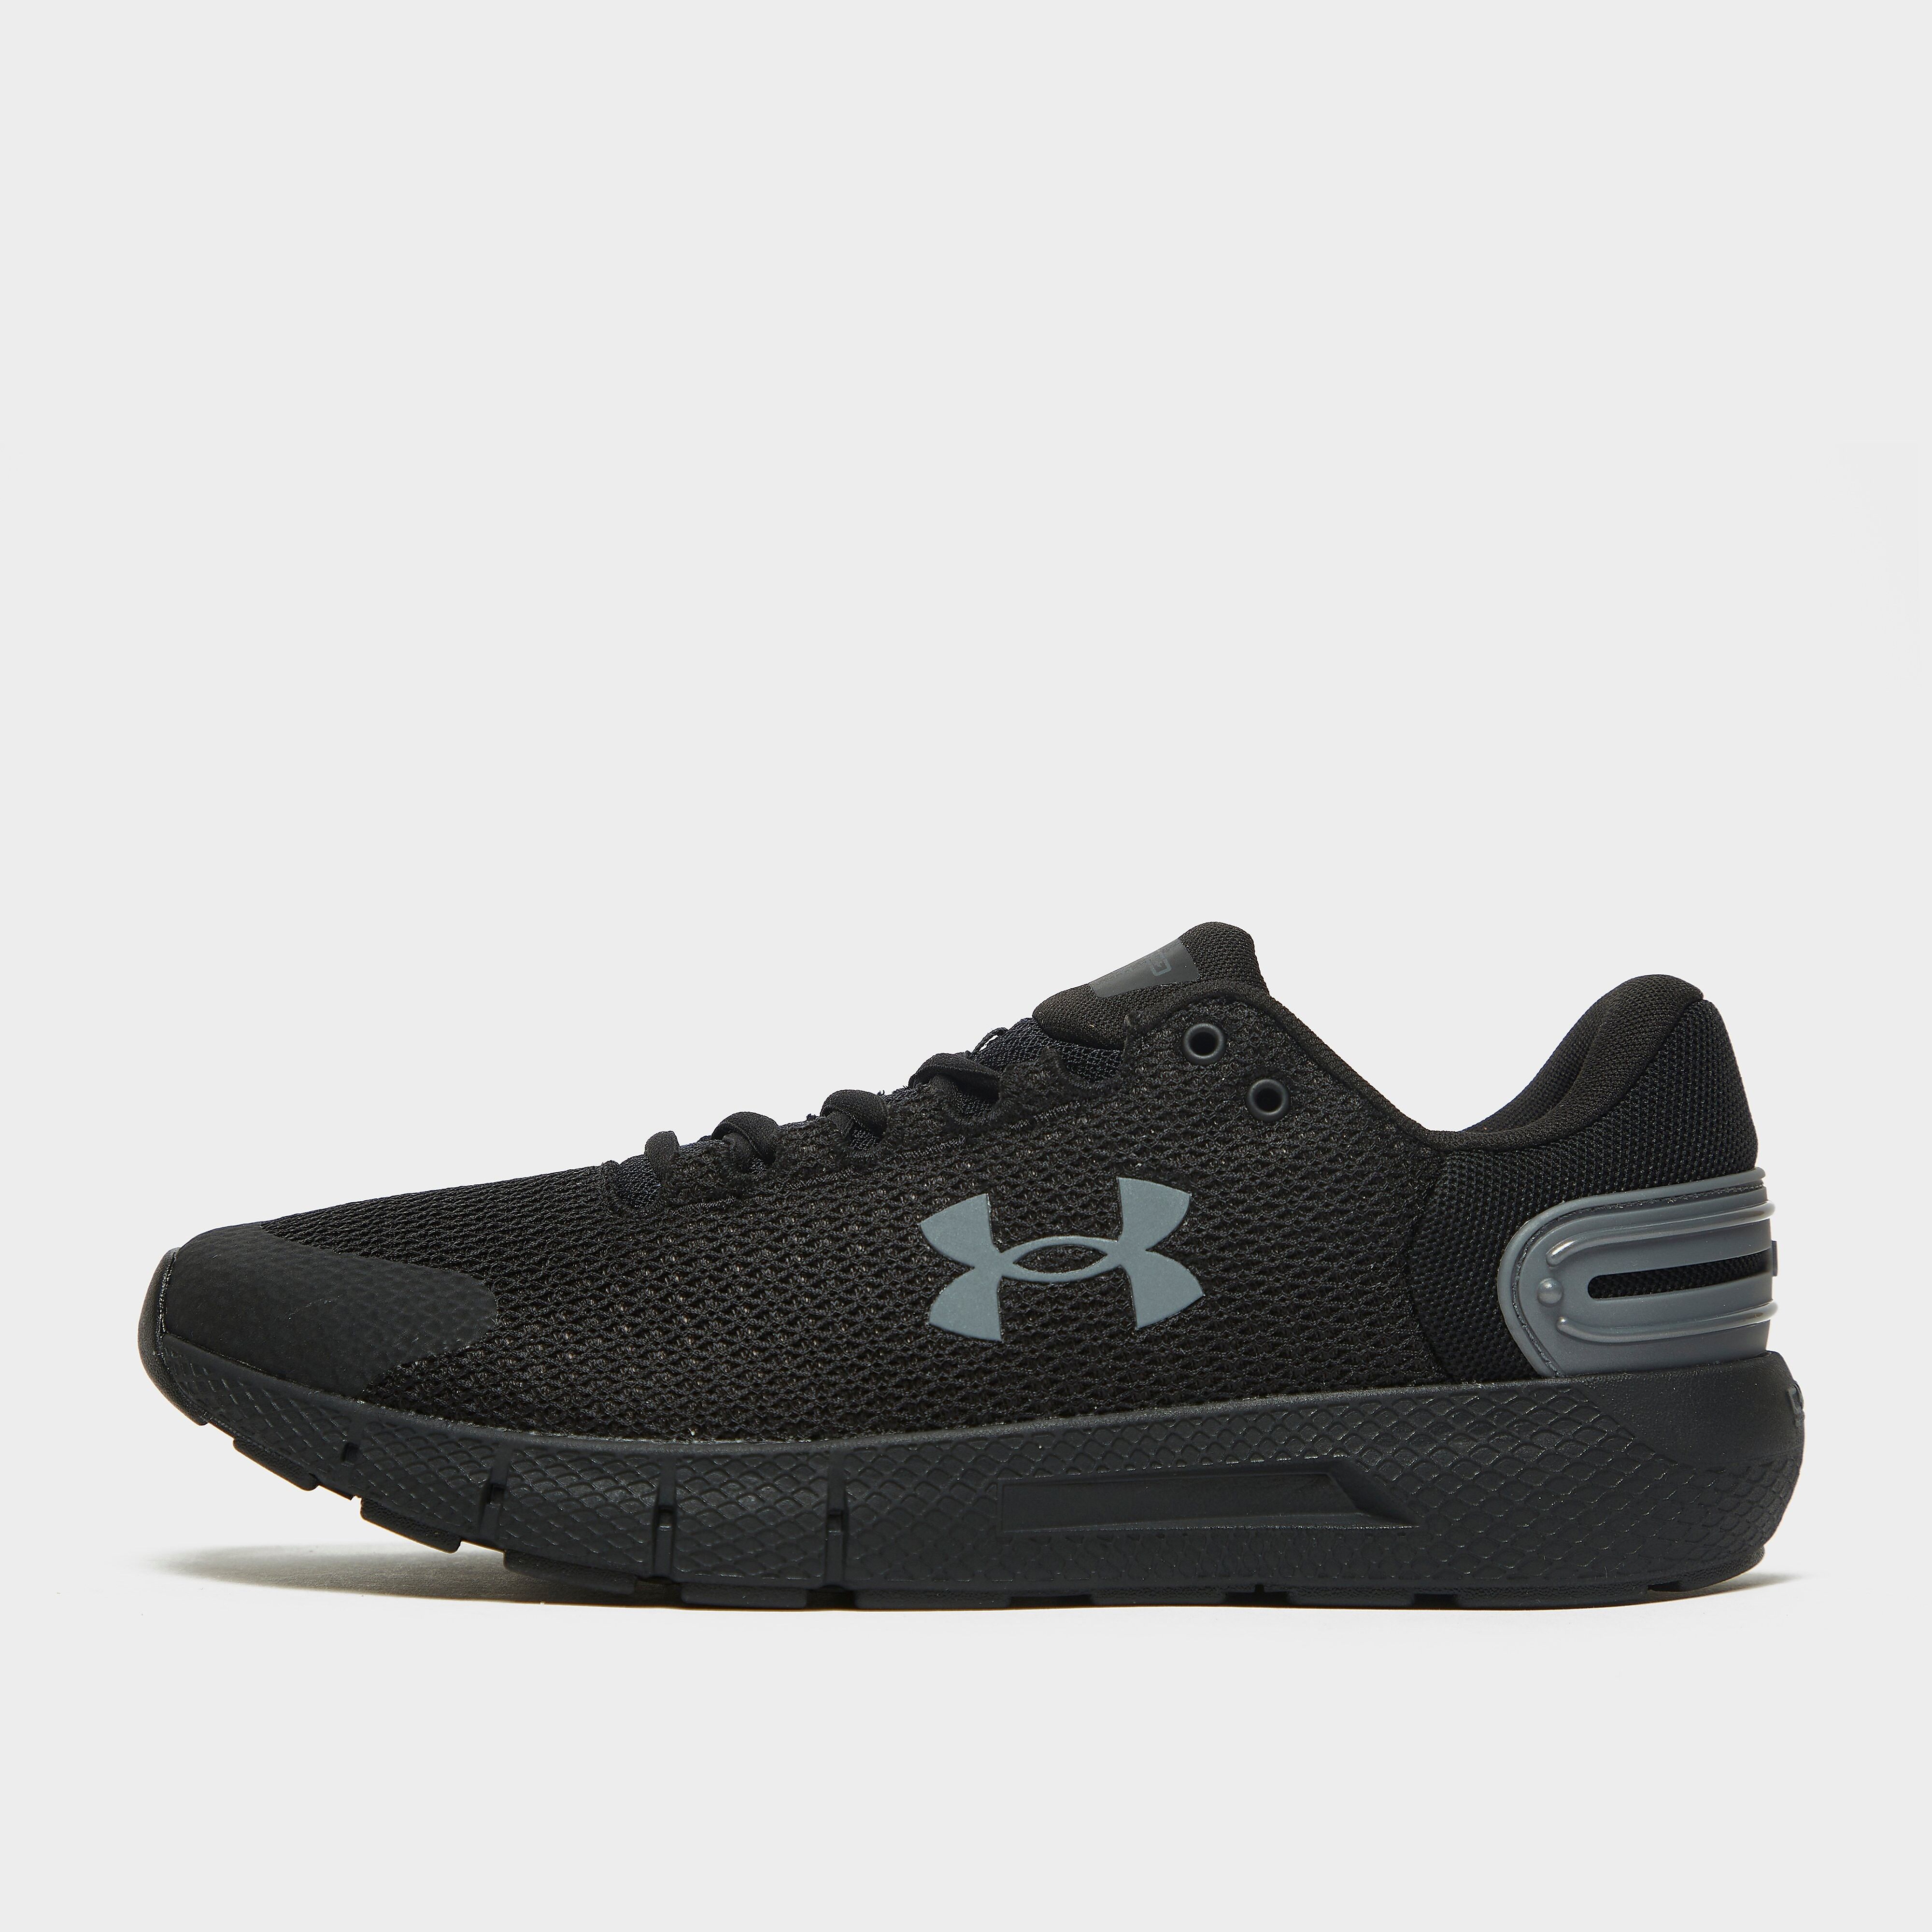 Under Armour Charged Rogue 2.5 - Black - Mens  size: 11